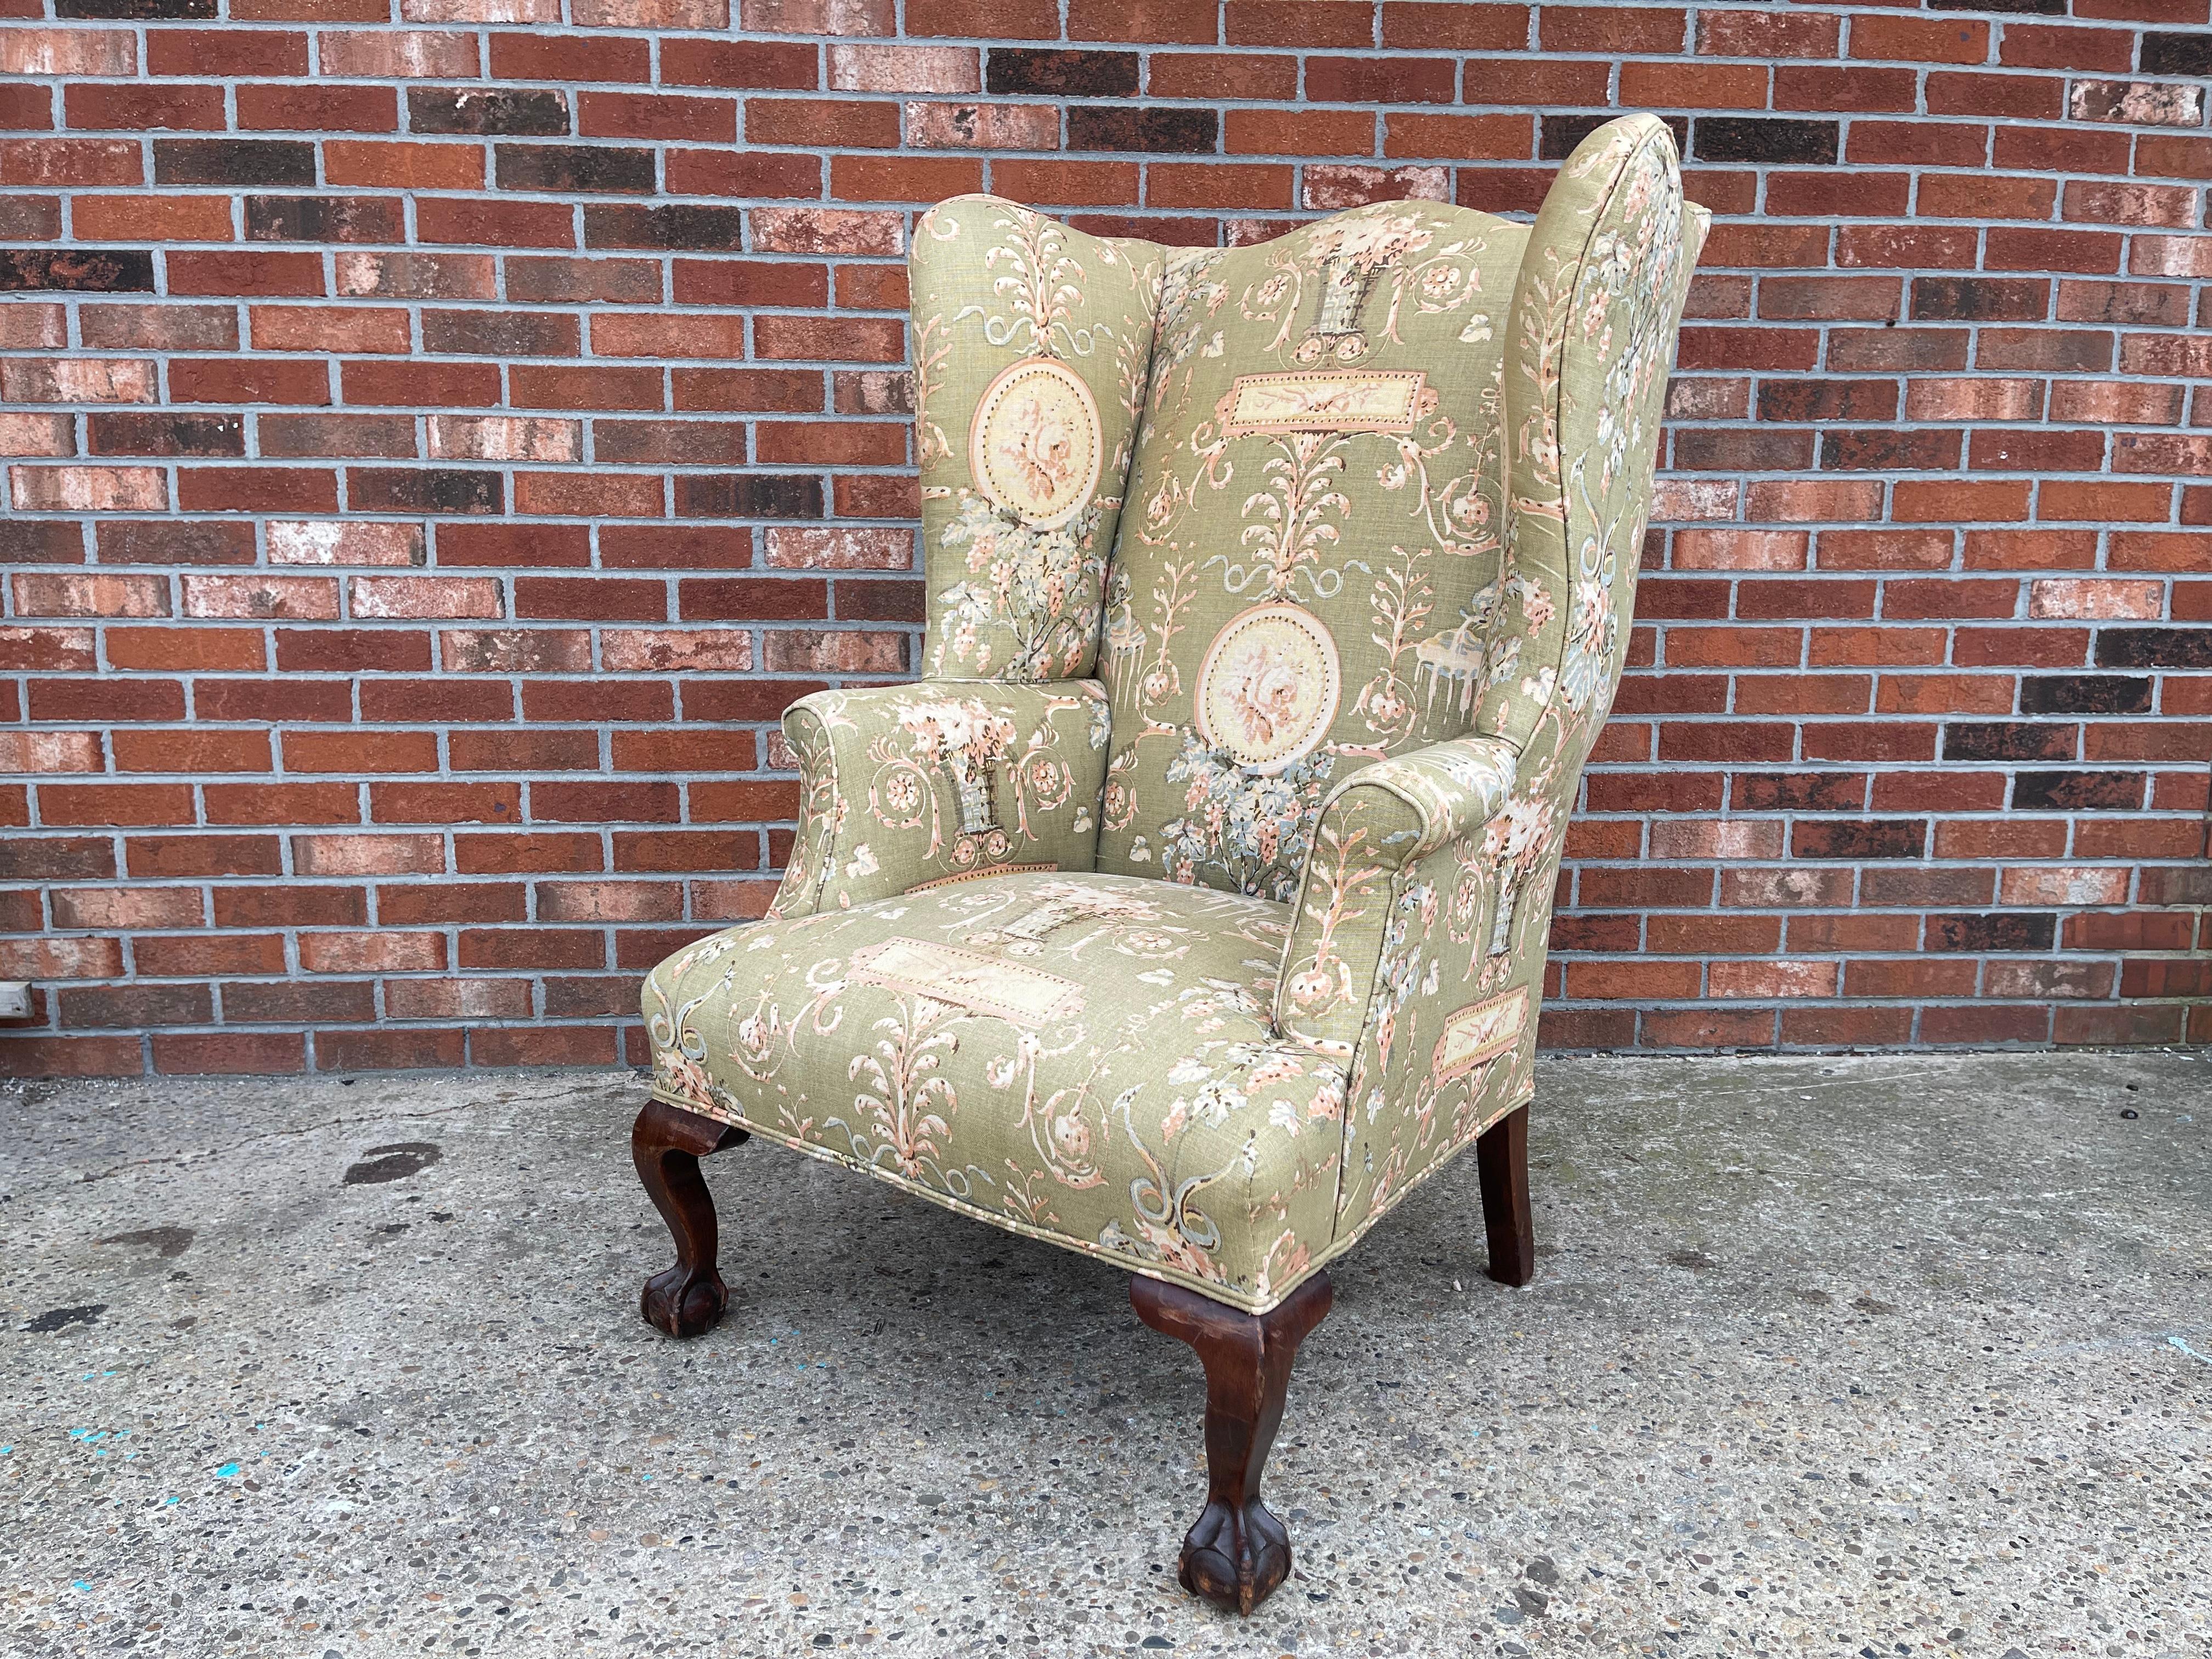 Upholstery Antique English Queen Anne Style Upholstered Wingback Chair